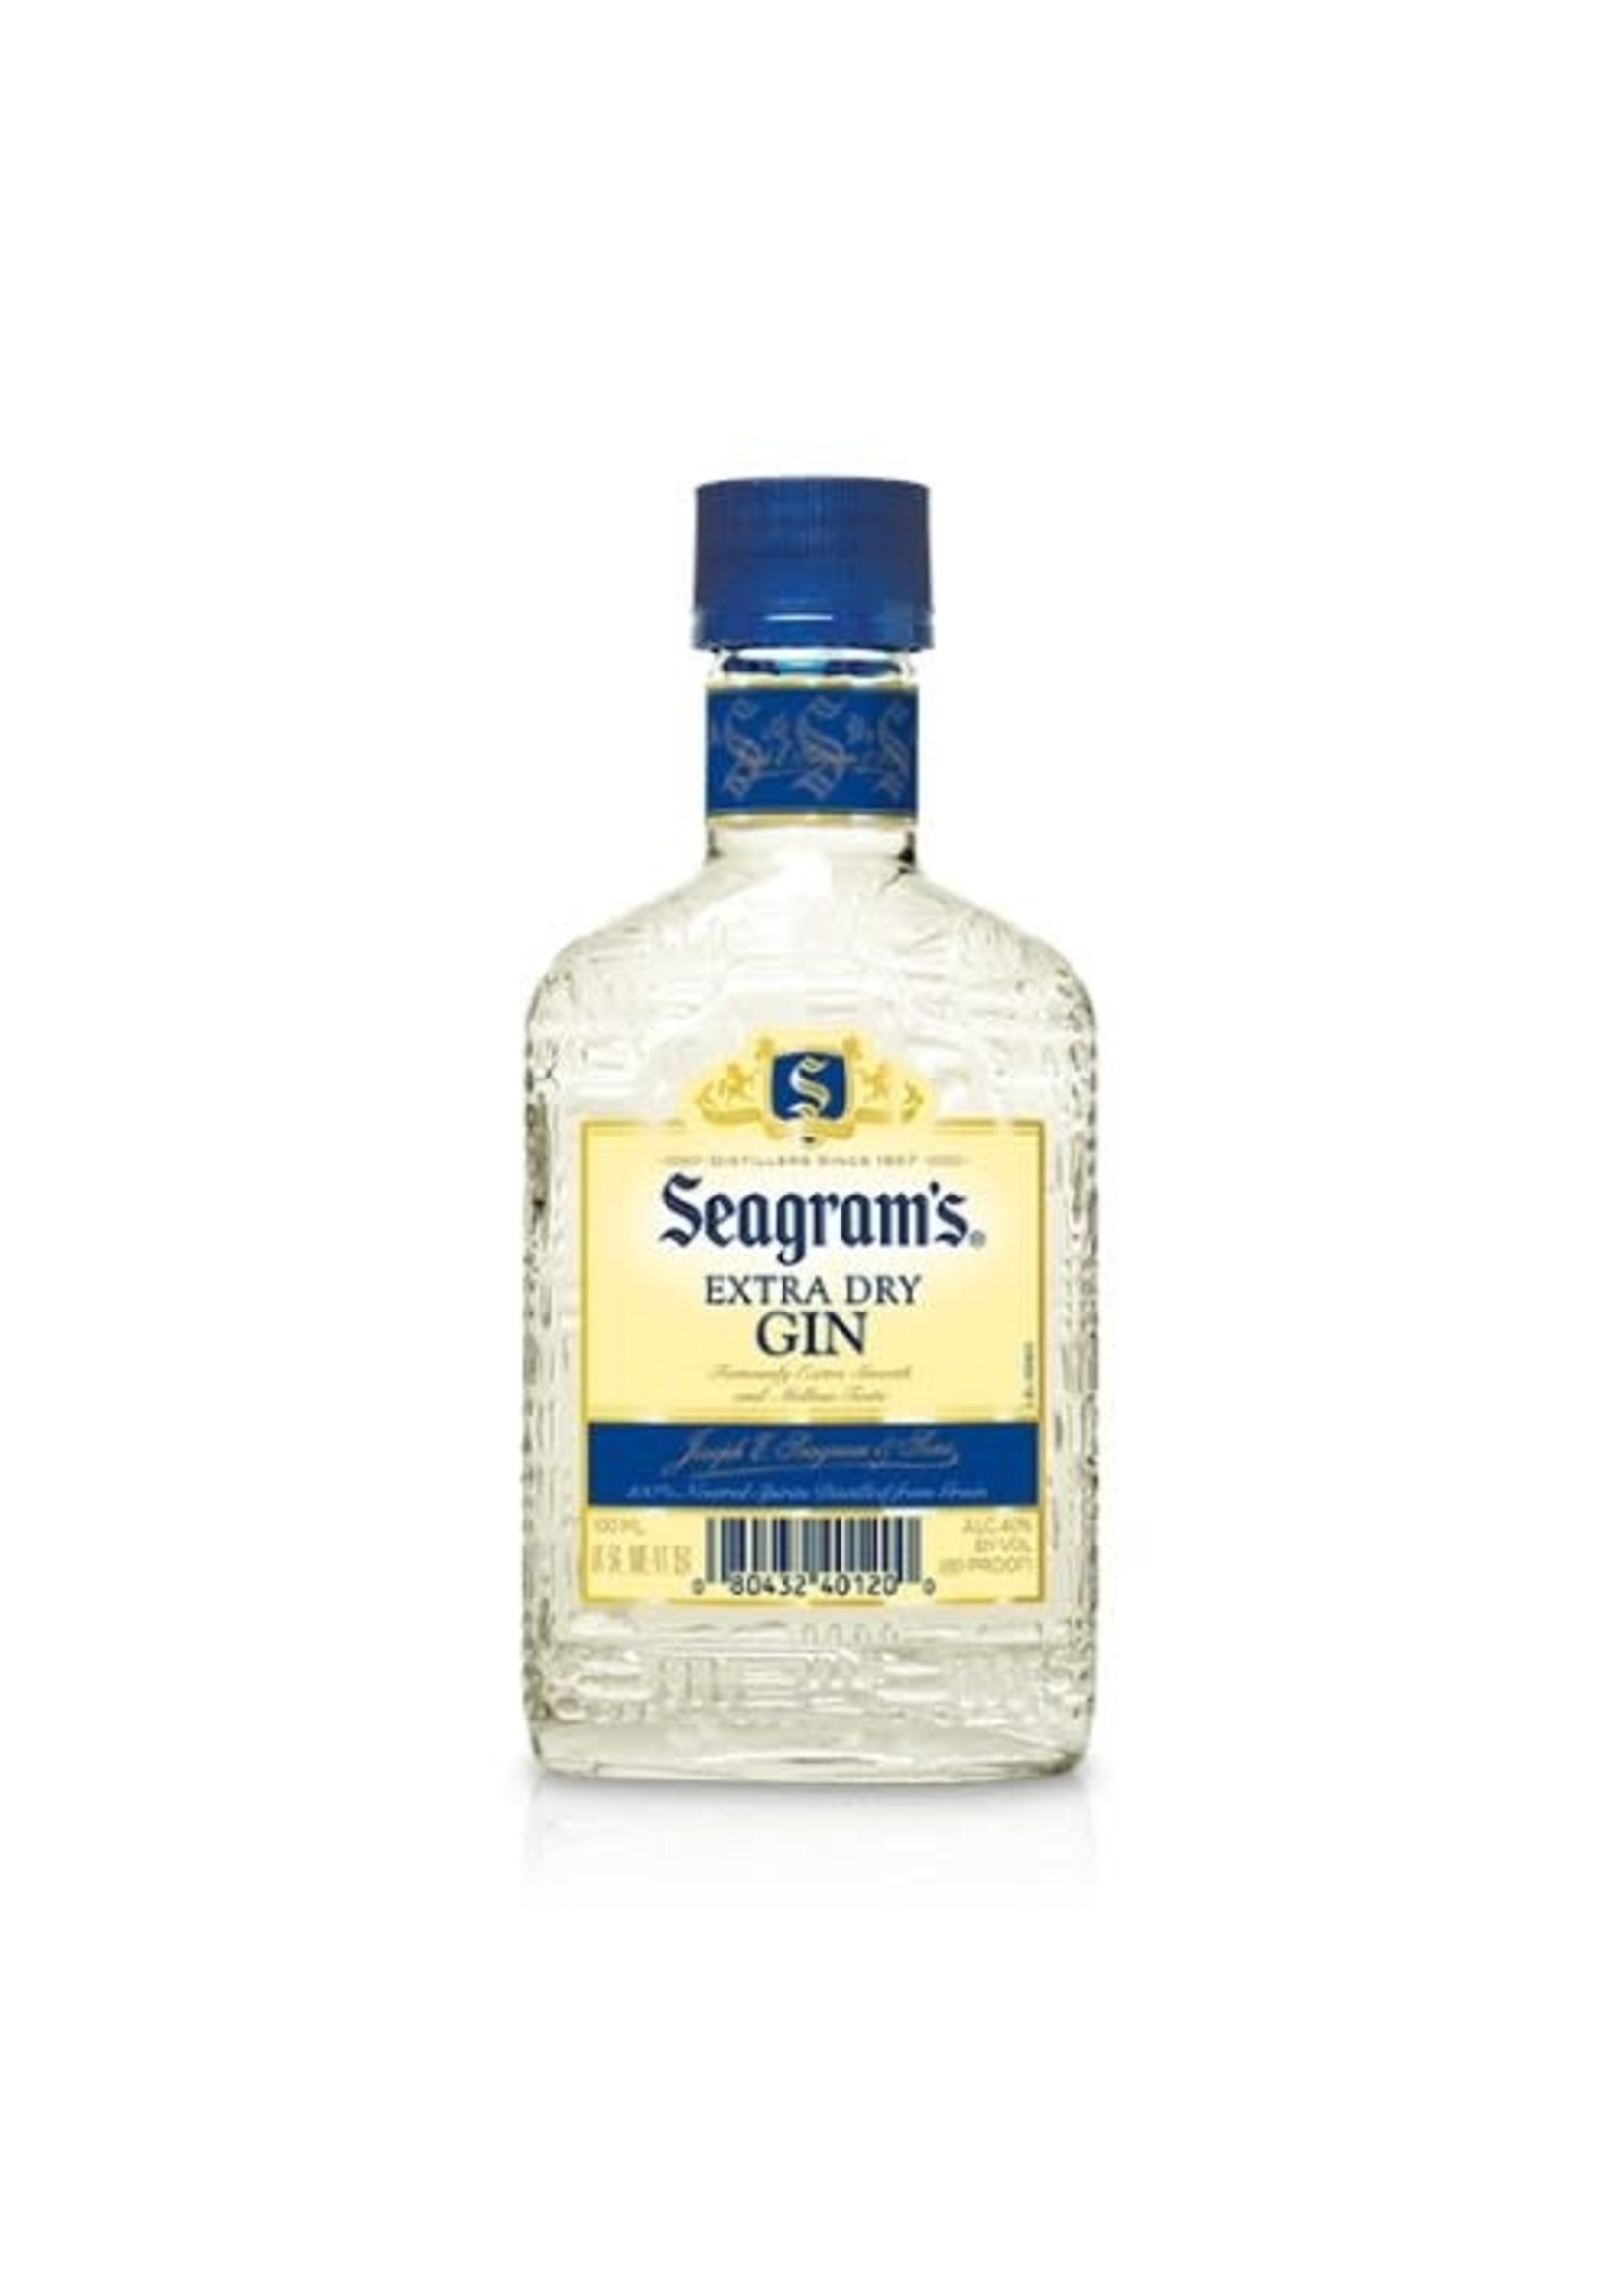 SEAGRAM'S SEAGRAM'S	EXTRA DRY GIN	.375L